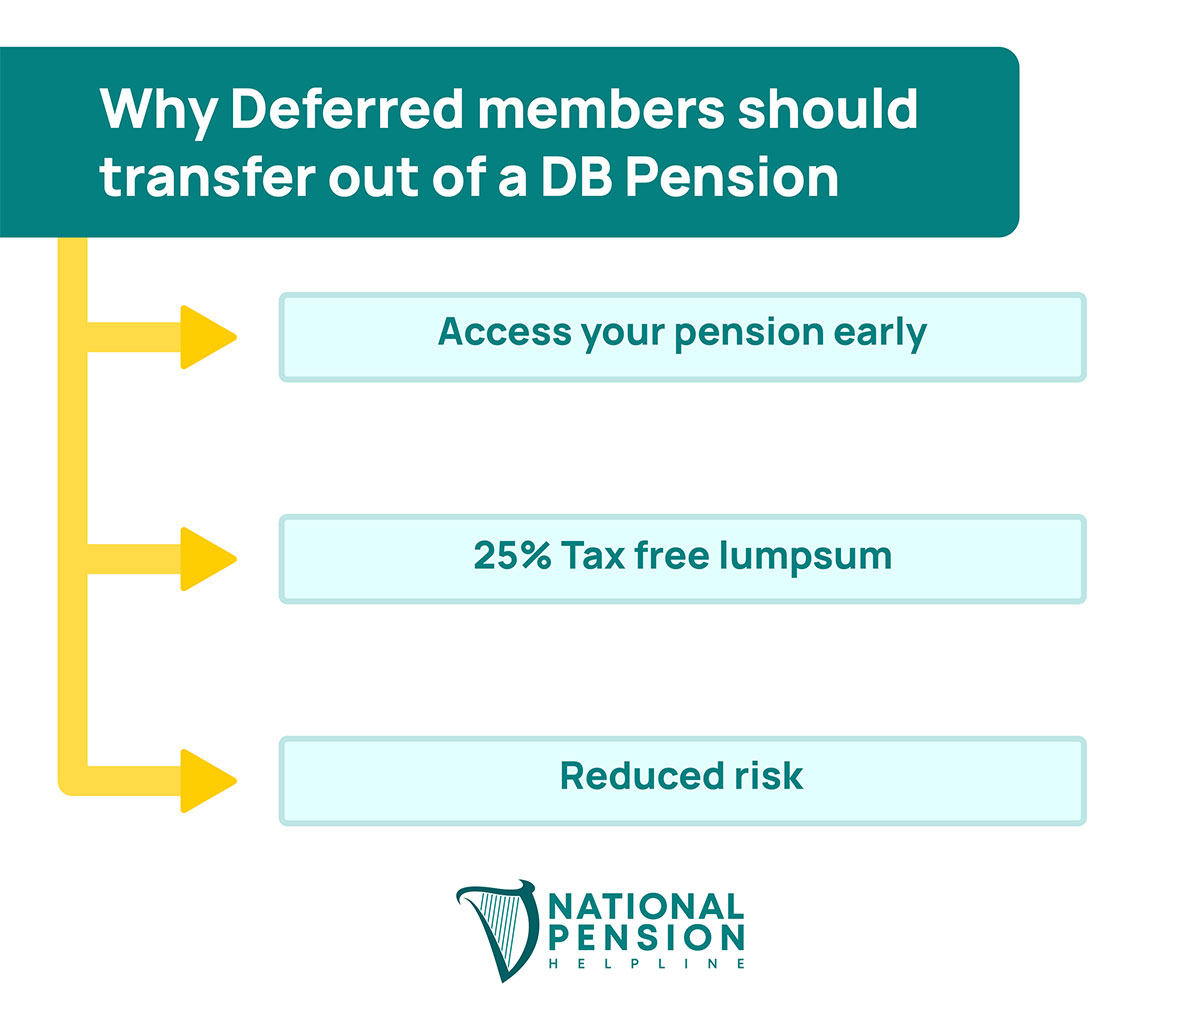 reasons differed pension members should transfer out of a DB pension 